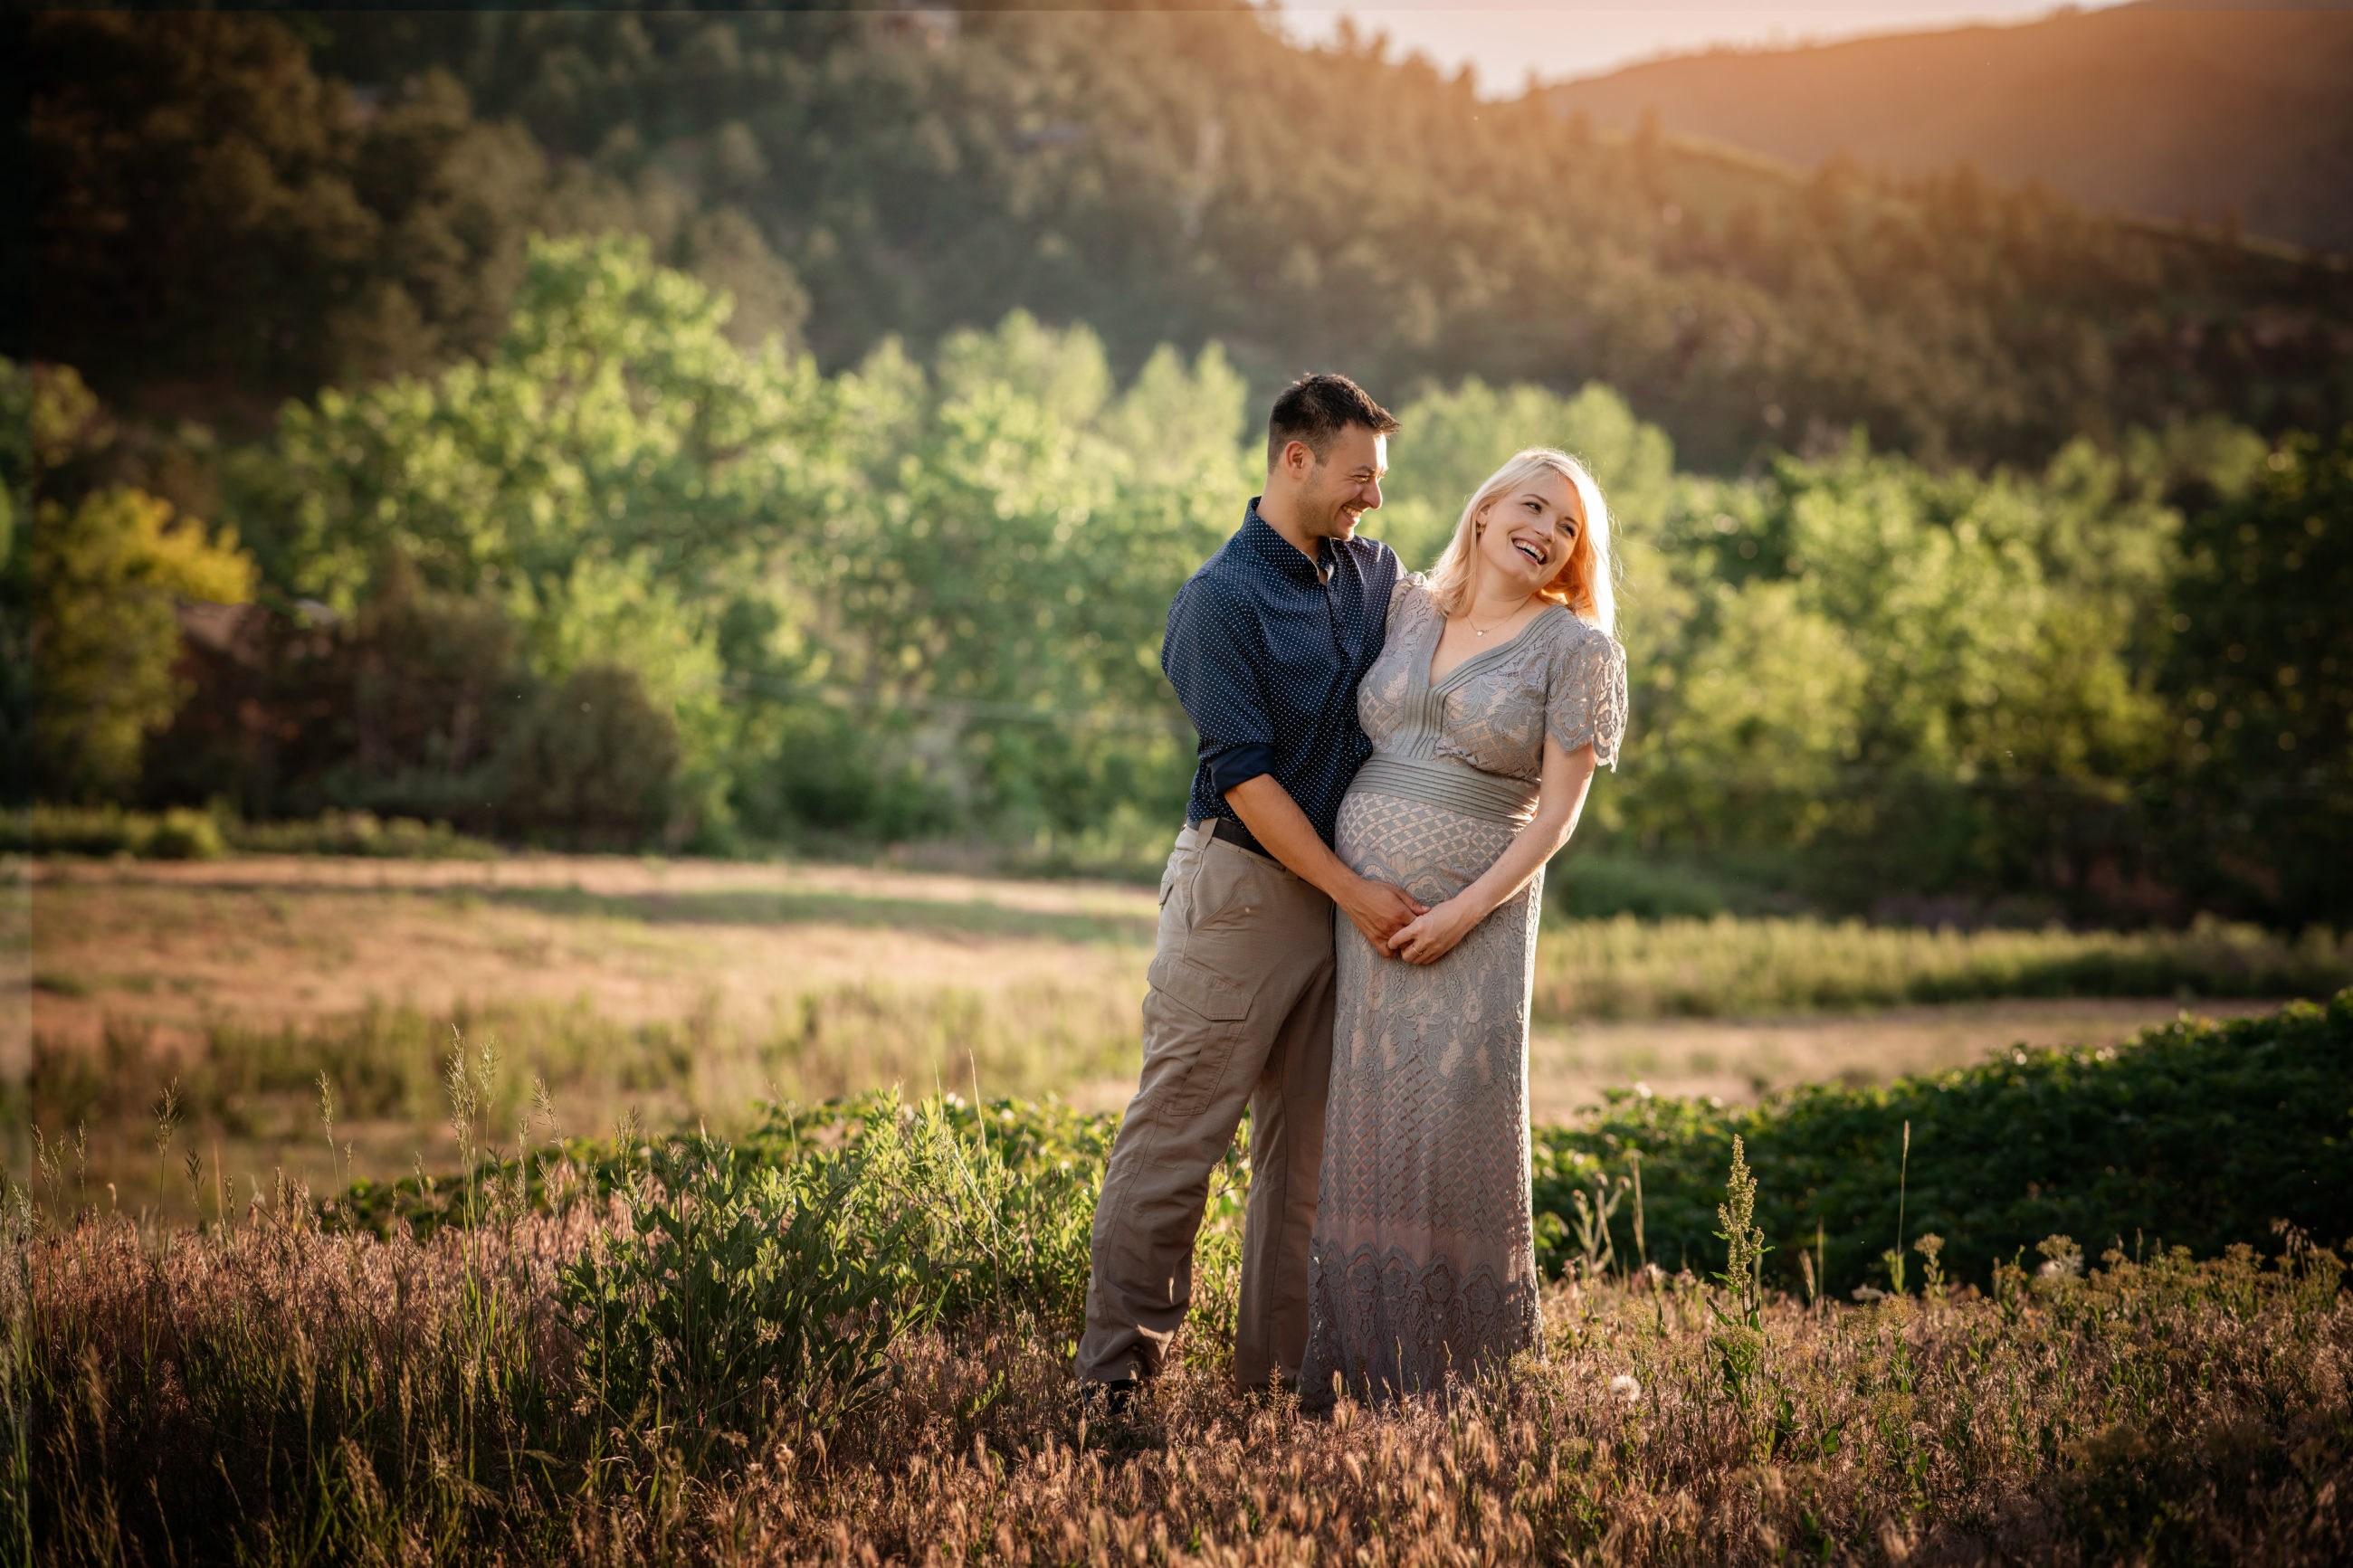 Boulder Photographer | Newborn & Maternity Session - happy couple laughing in beautiful field at sunset maternity